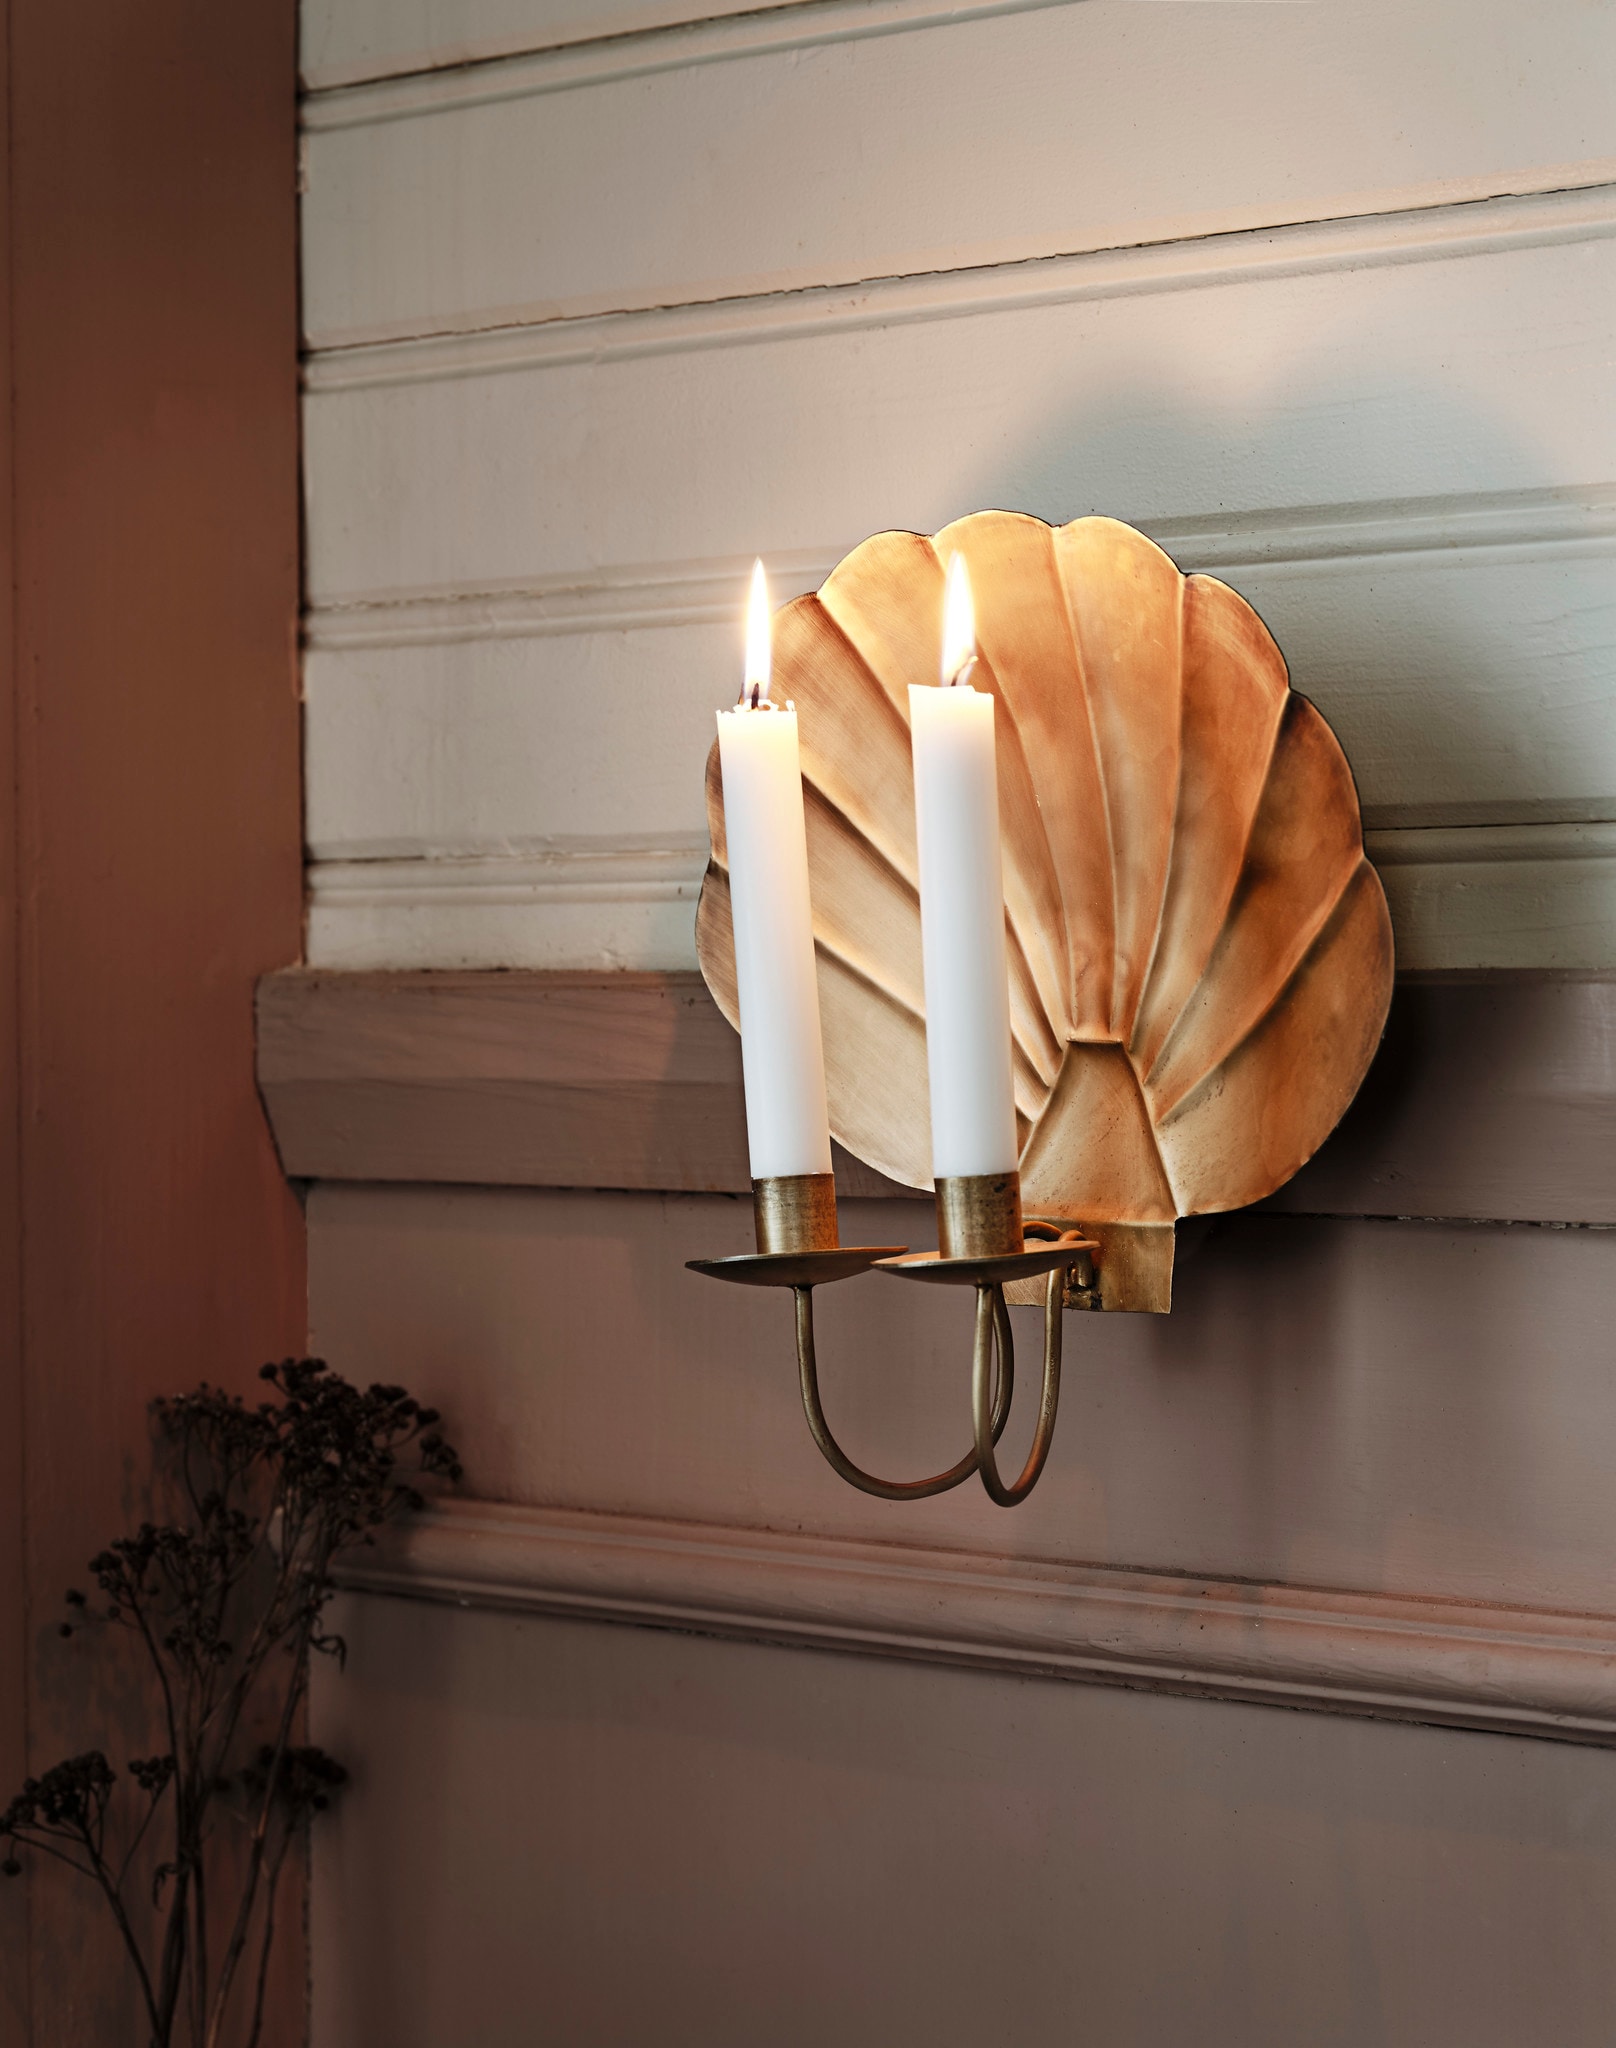 Sconce Shell Antique Brass